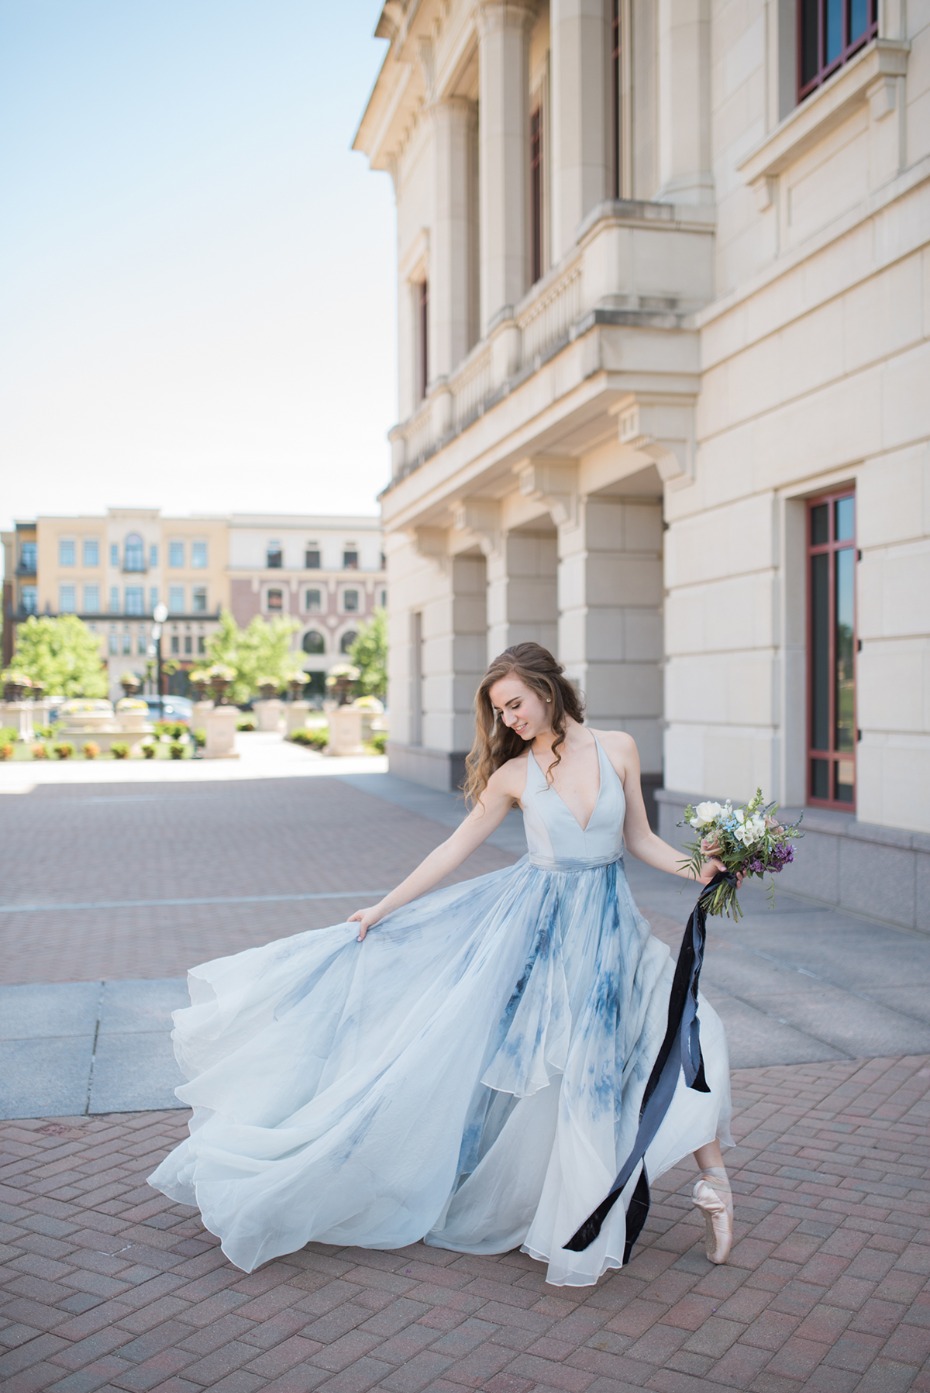 watercolor dress for your formal engagement shoot